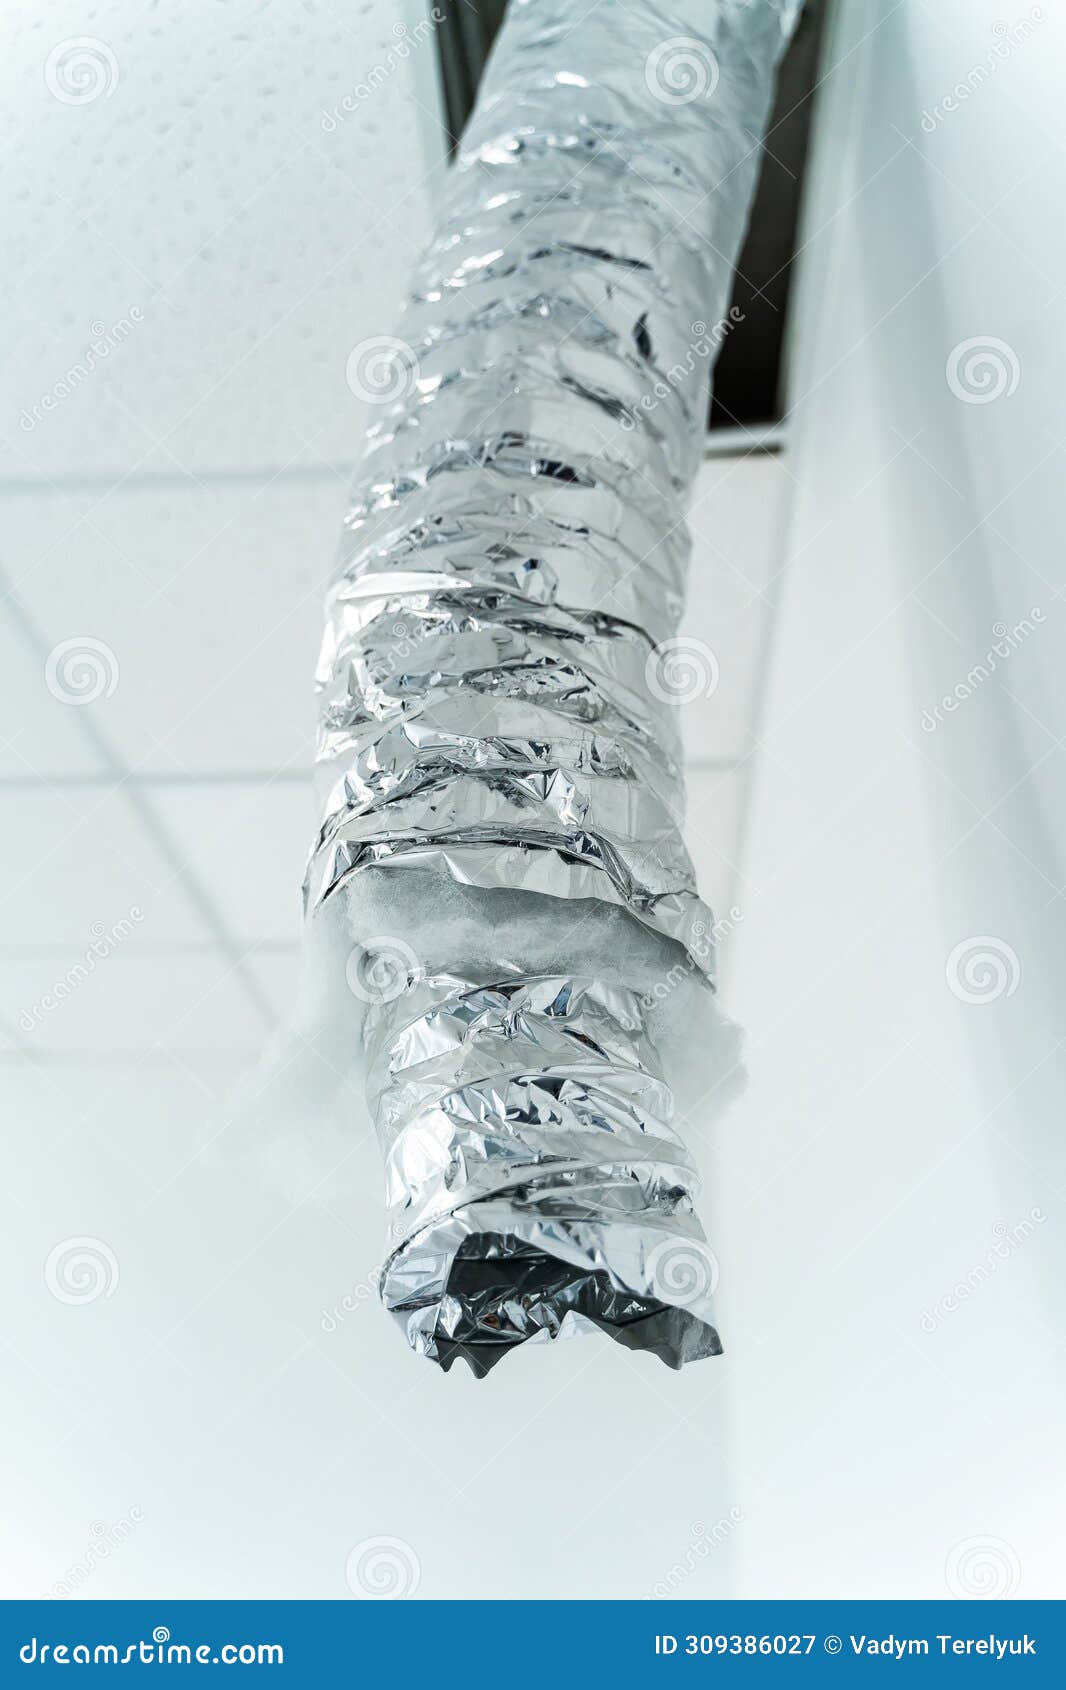 internet cable in foil hangs from the ceiling. empty industrial facility with grey wall. air conditioning tube. closeup